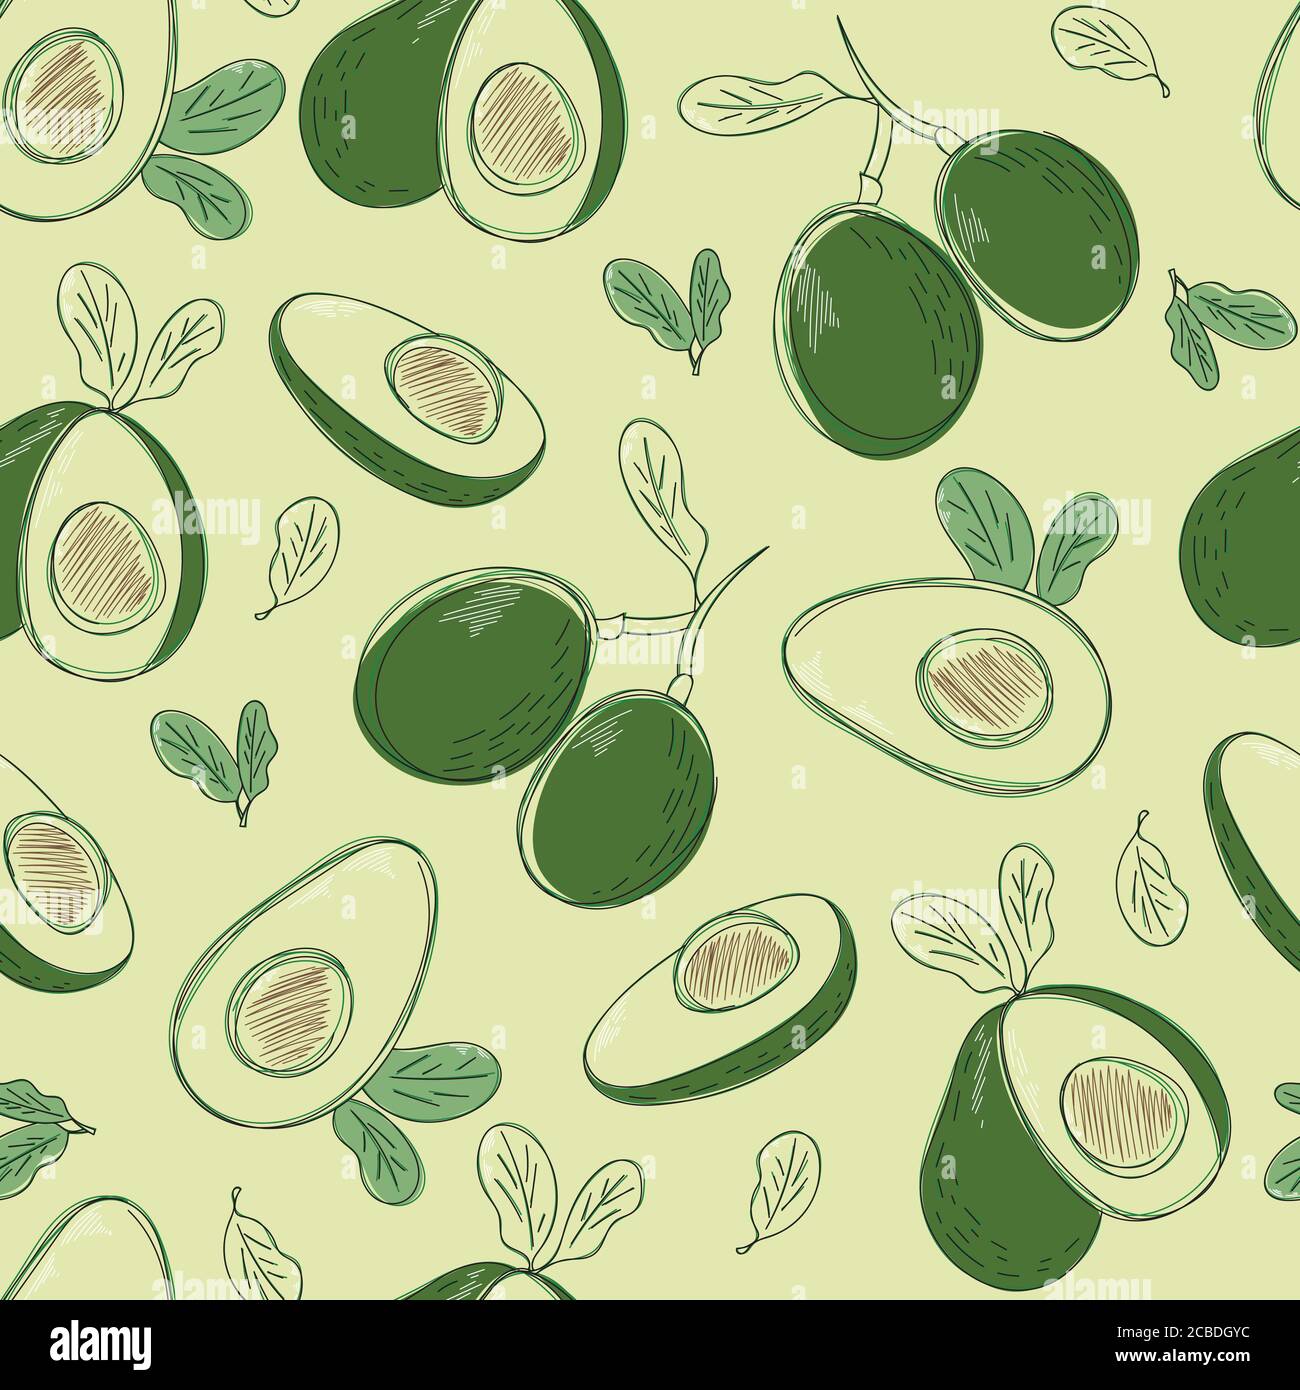 Vector seamless background with whole and sliced avocado fruit on a light background Stock Vector